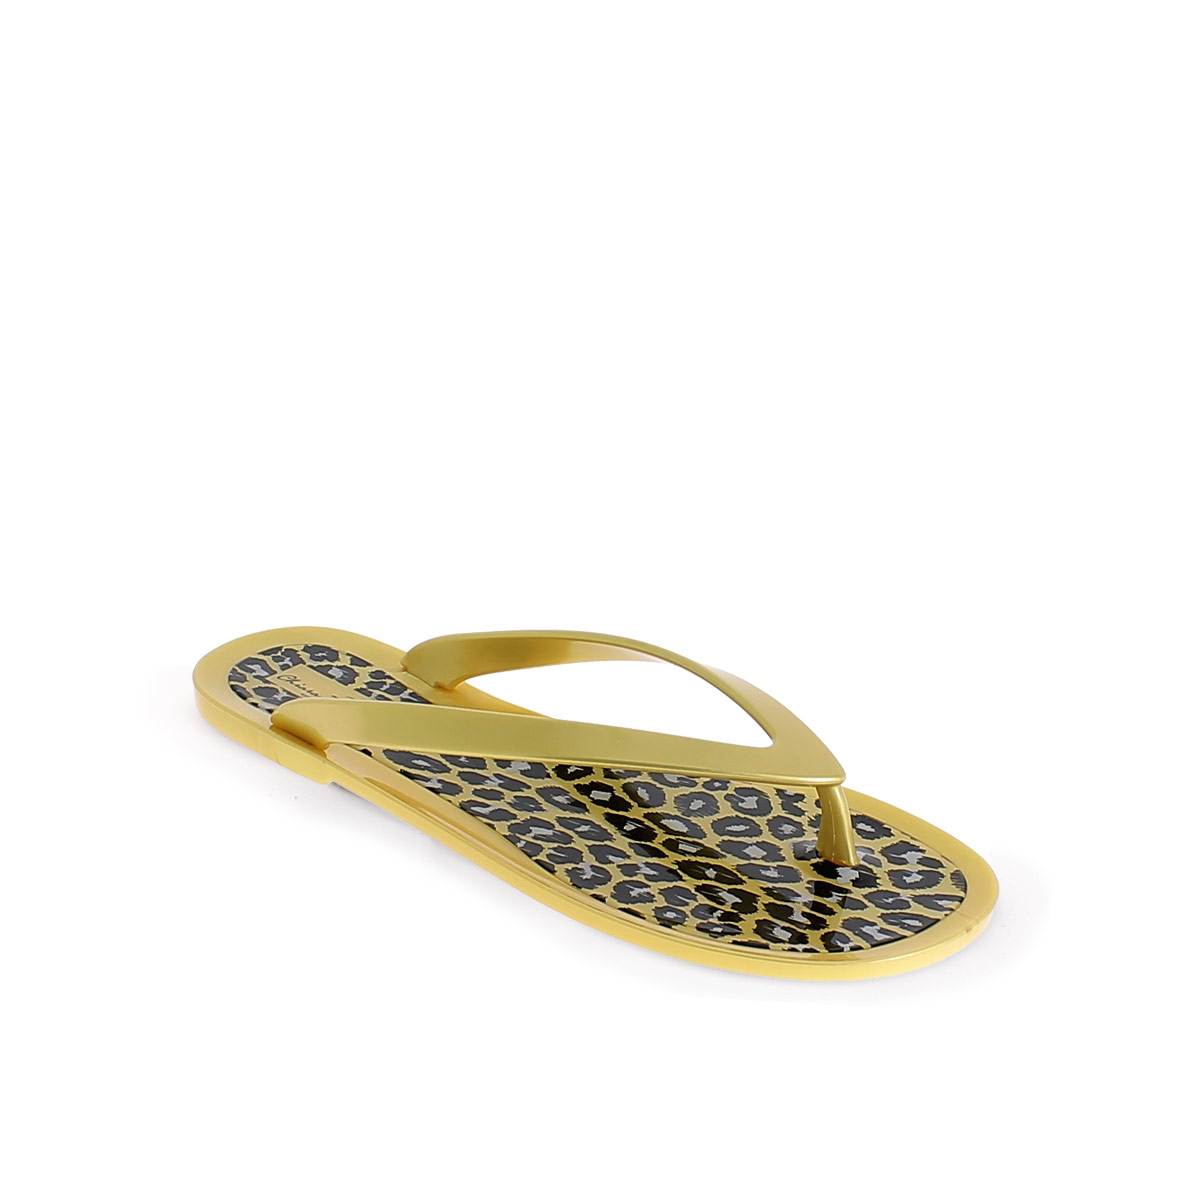 GOLD PVC THONG SLIPPER WITH LEOPARD PRINTING INSOLE